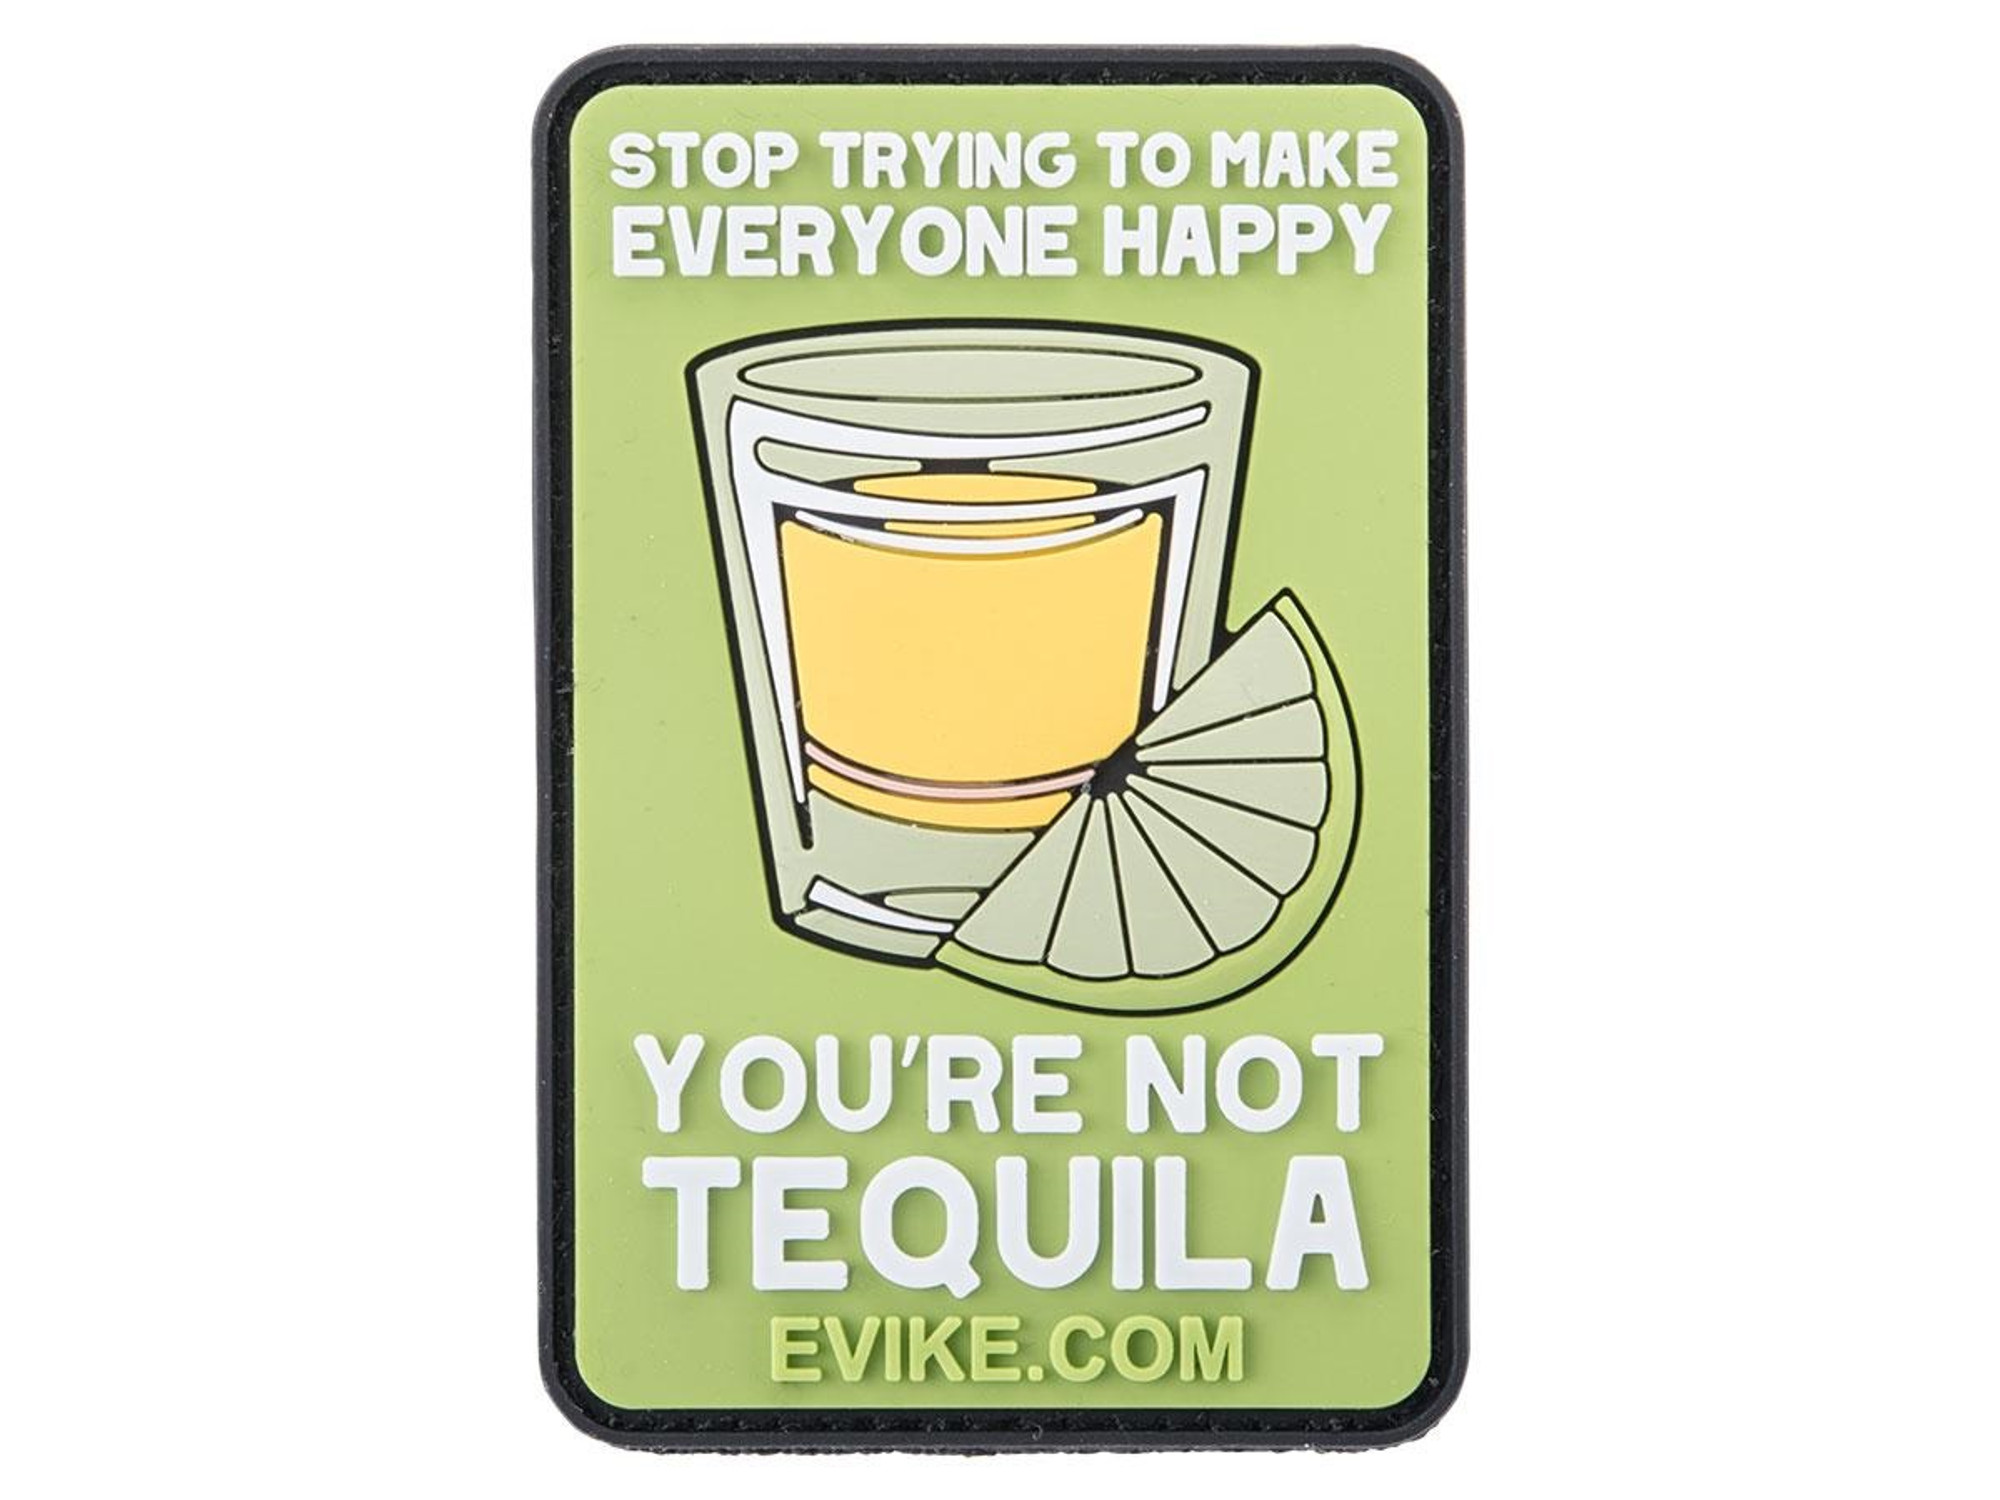 "Not Tequila" PVC Morale Patch